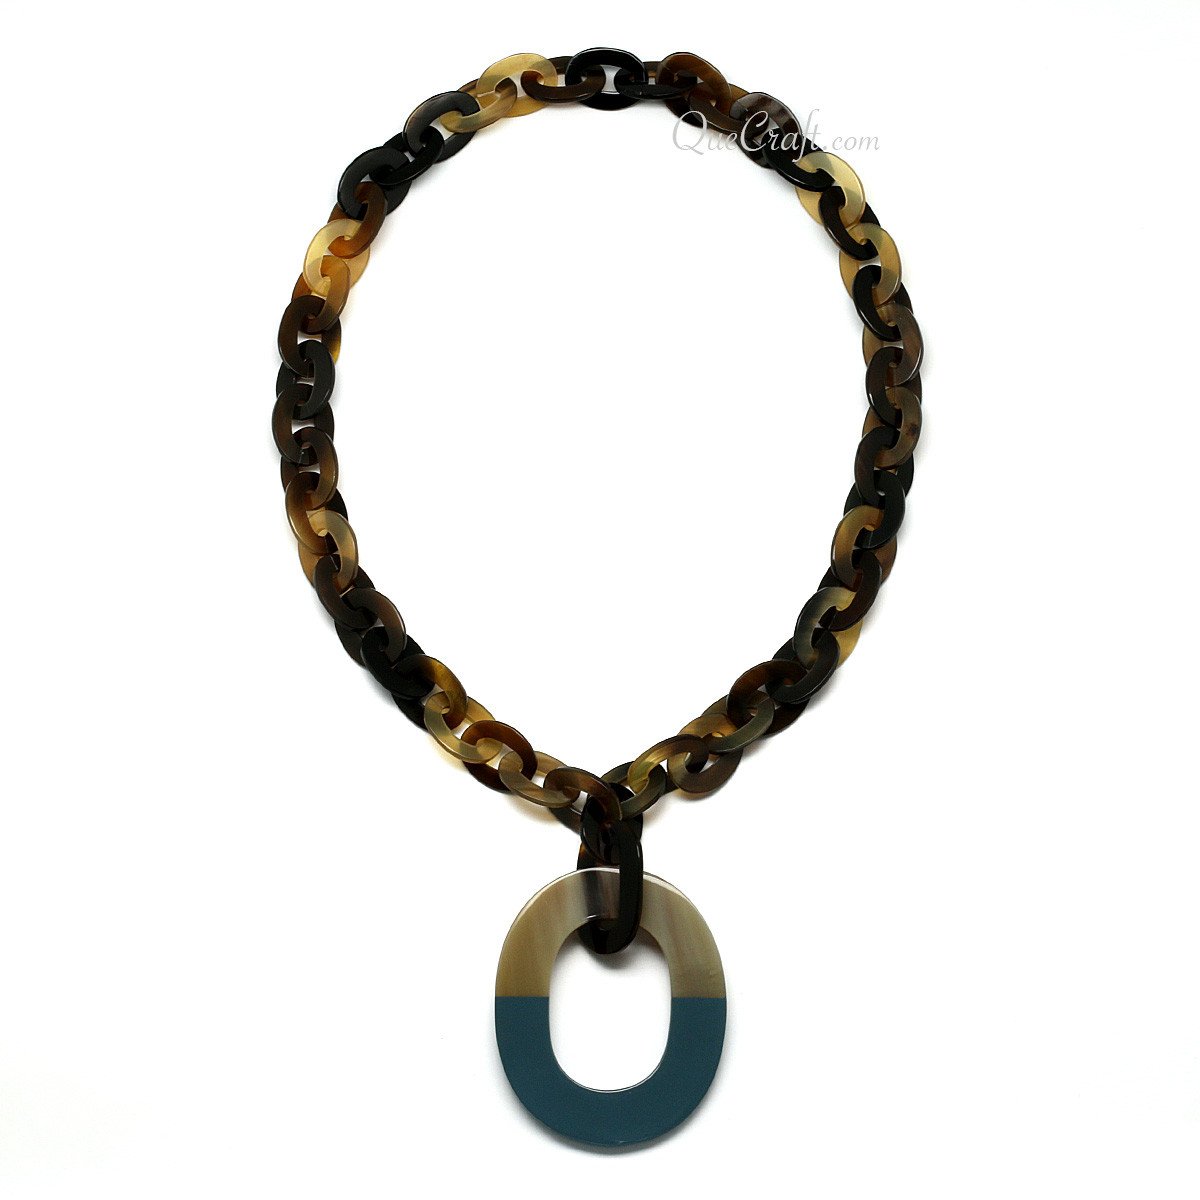 Horn & Lacquer Chain Necklace #10754 - HORN JEWELRY